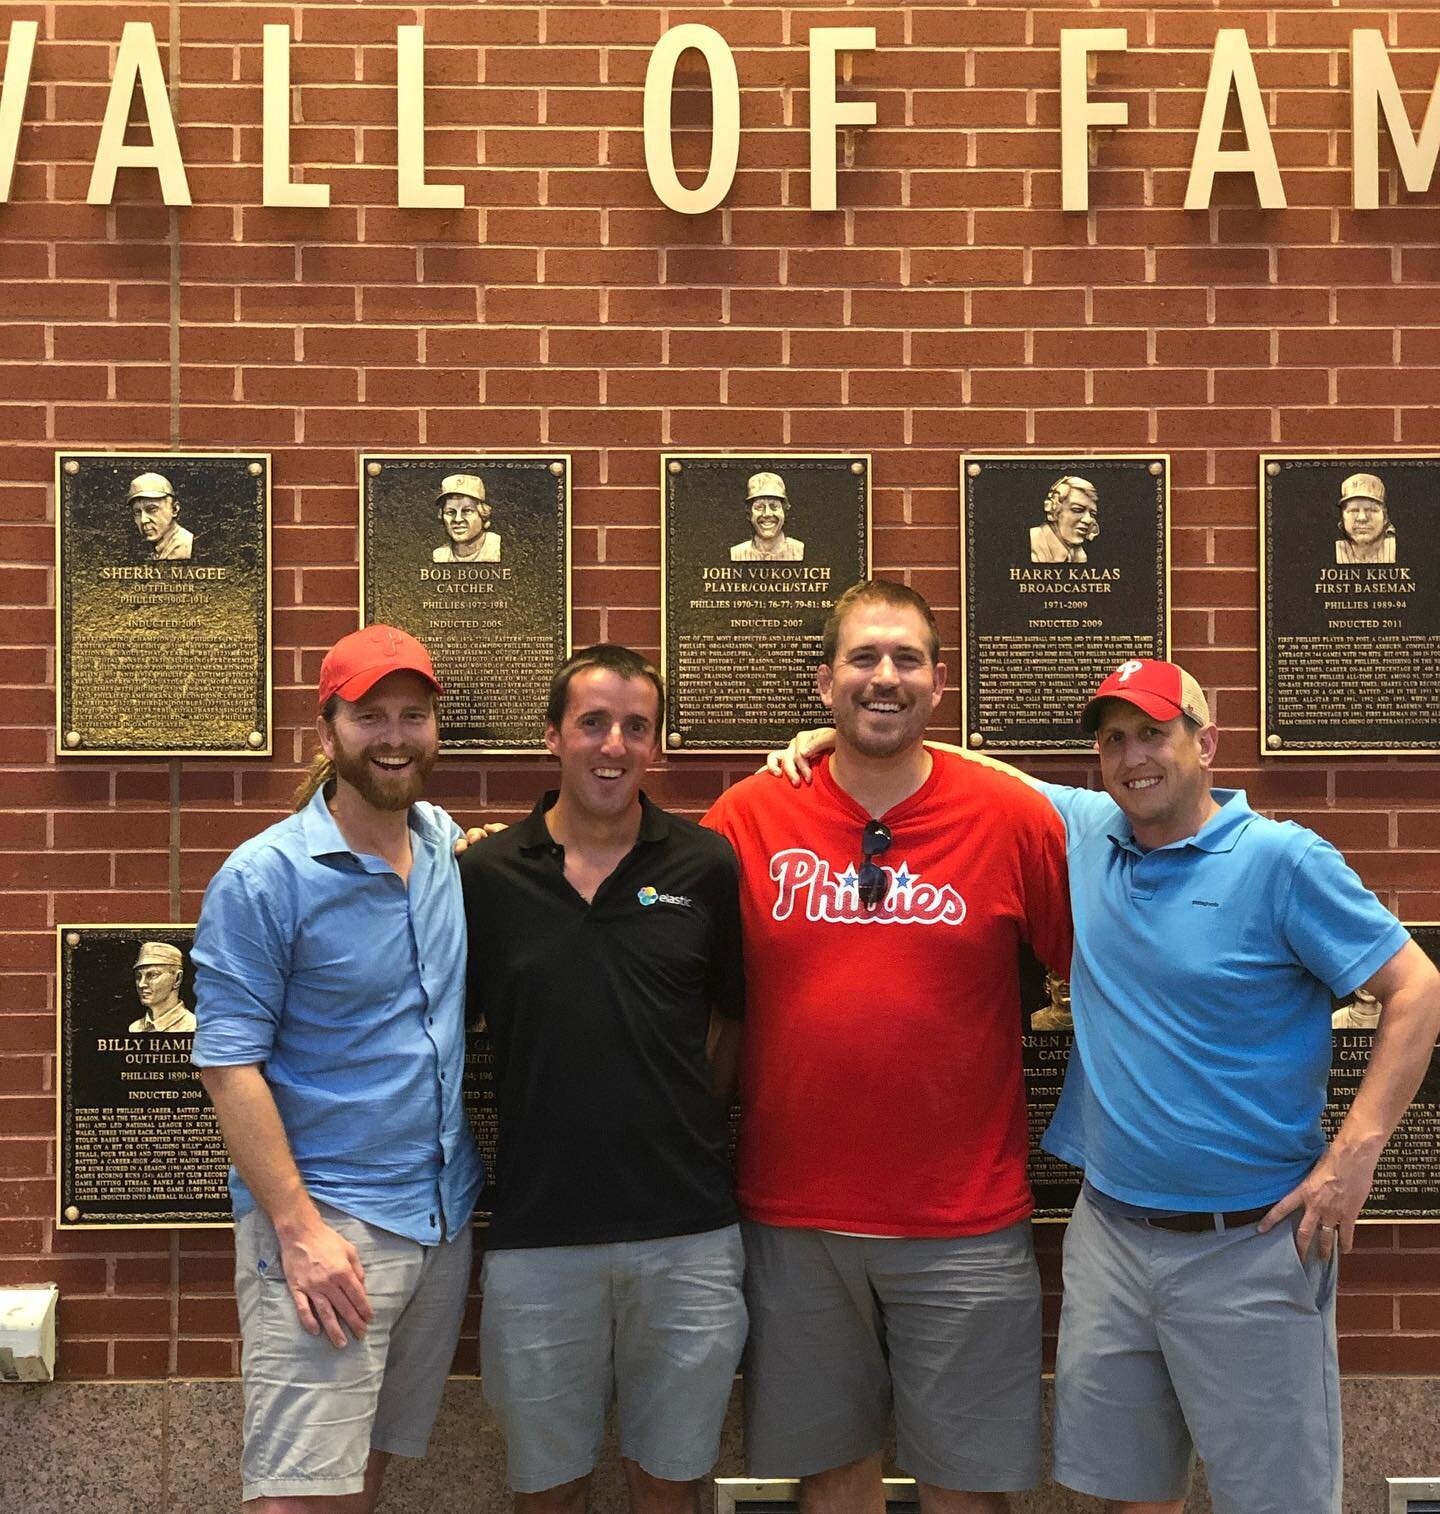 What do you get when you combine the @phillies @indy_res @lifeatelastic and @childrensphila? #magic and #legends 
Here is to the wild ones.... #indyresofficechronicles